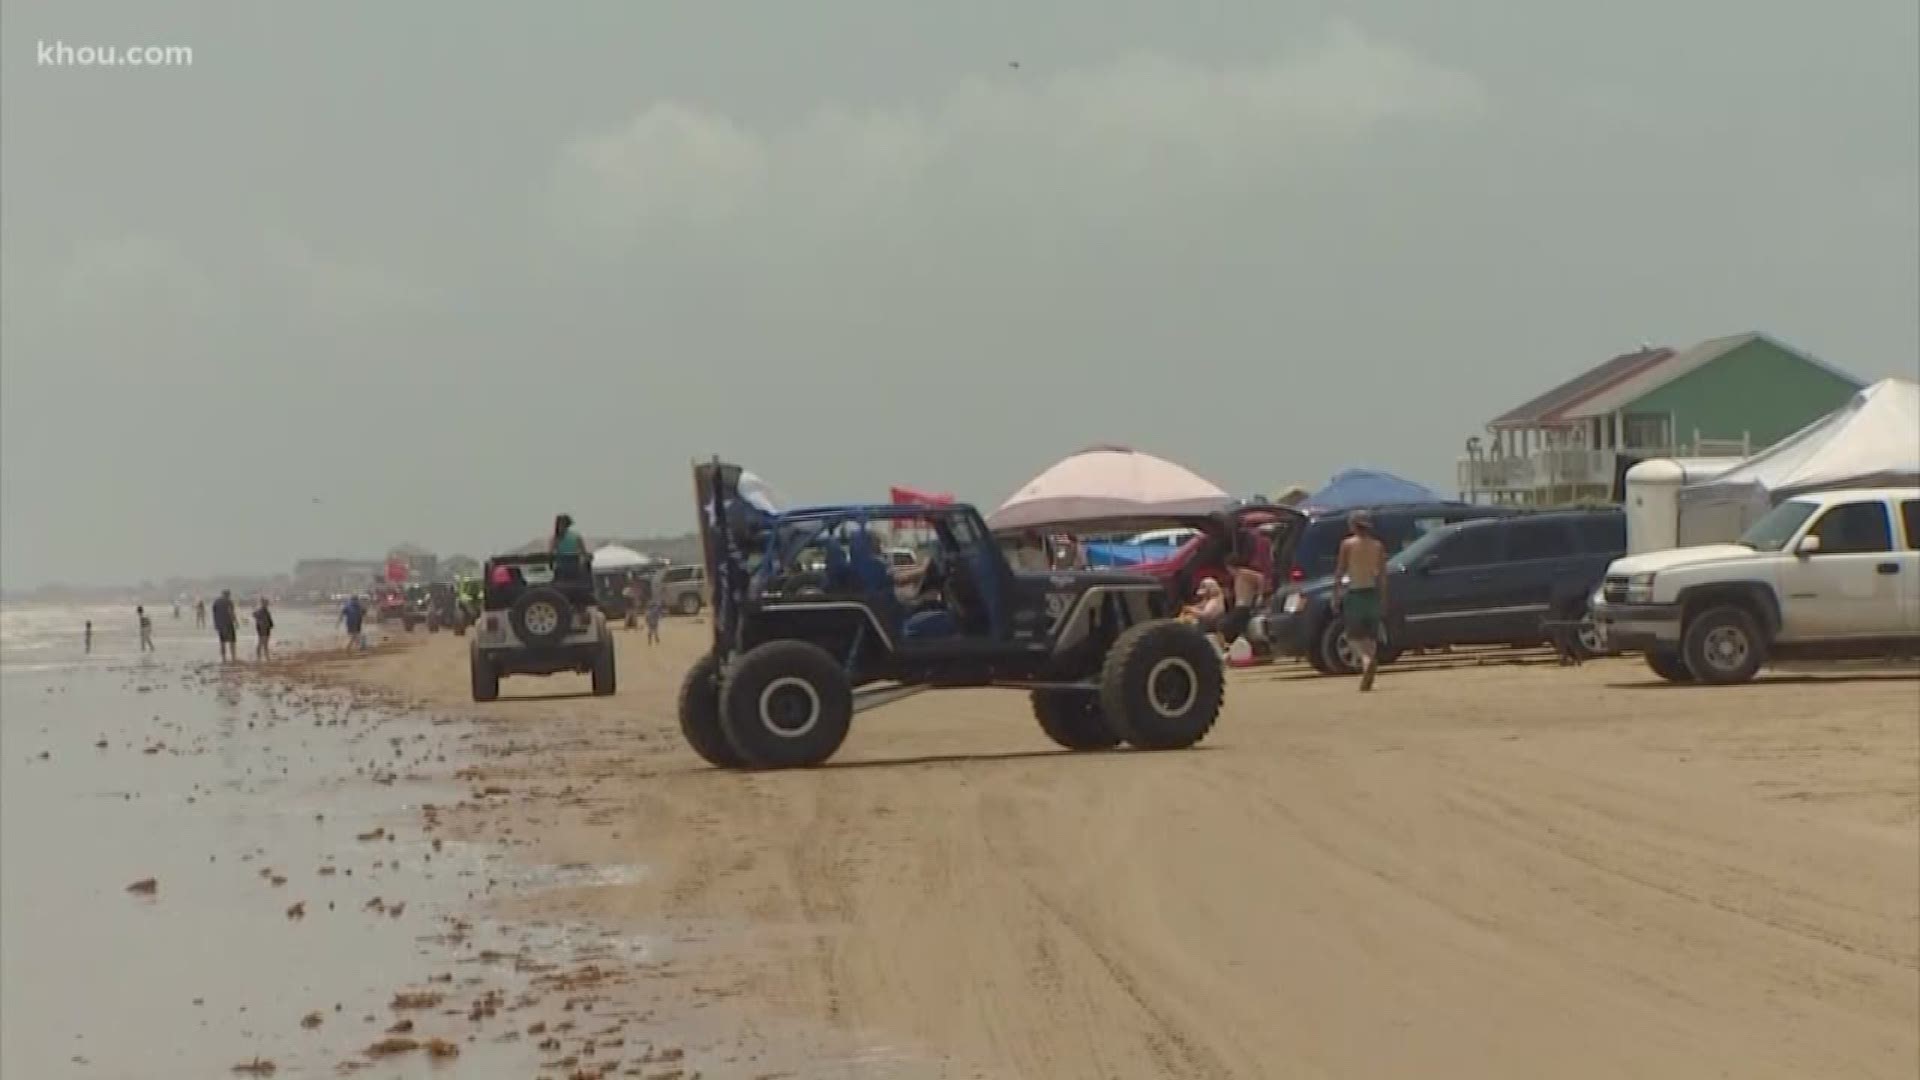 Thousands sign petition to end 'Go Topless' Jeep event after chaotic